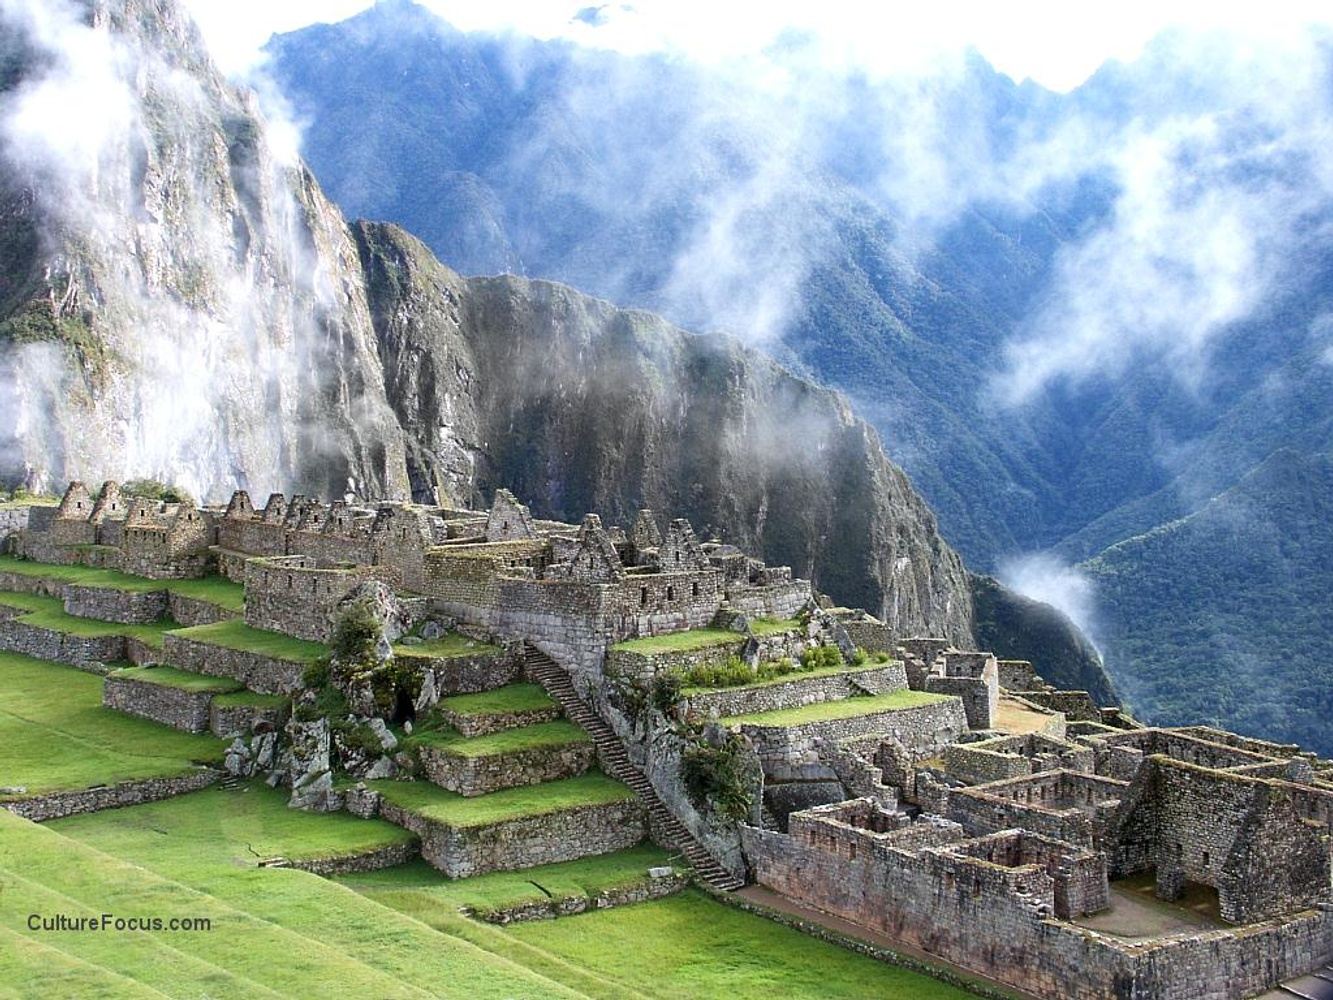 Ultimate hikes and Inca Treasures (Labor Day weekend)